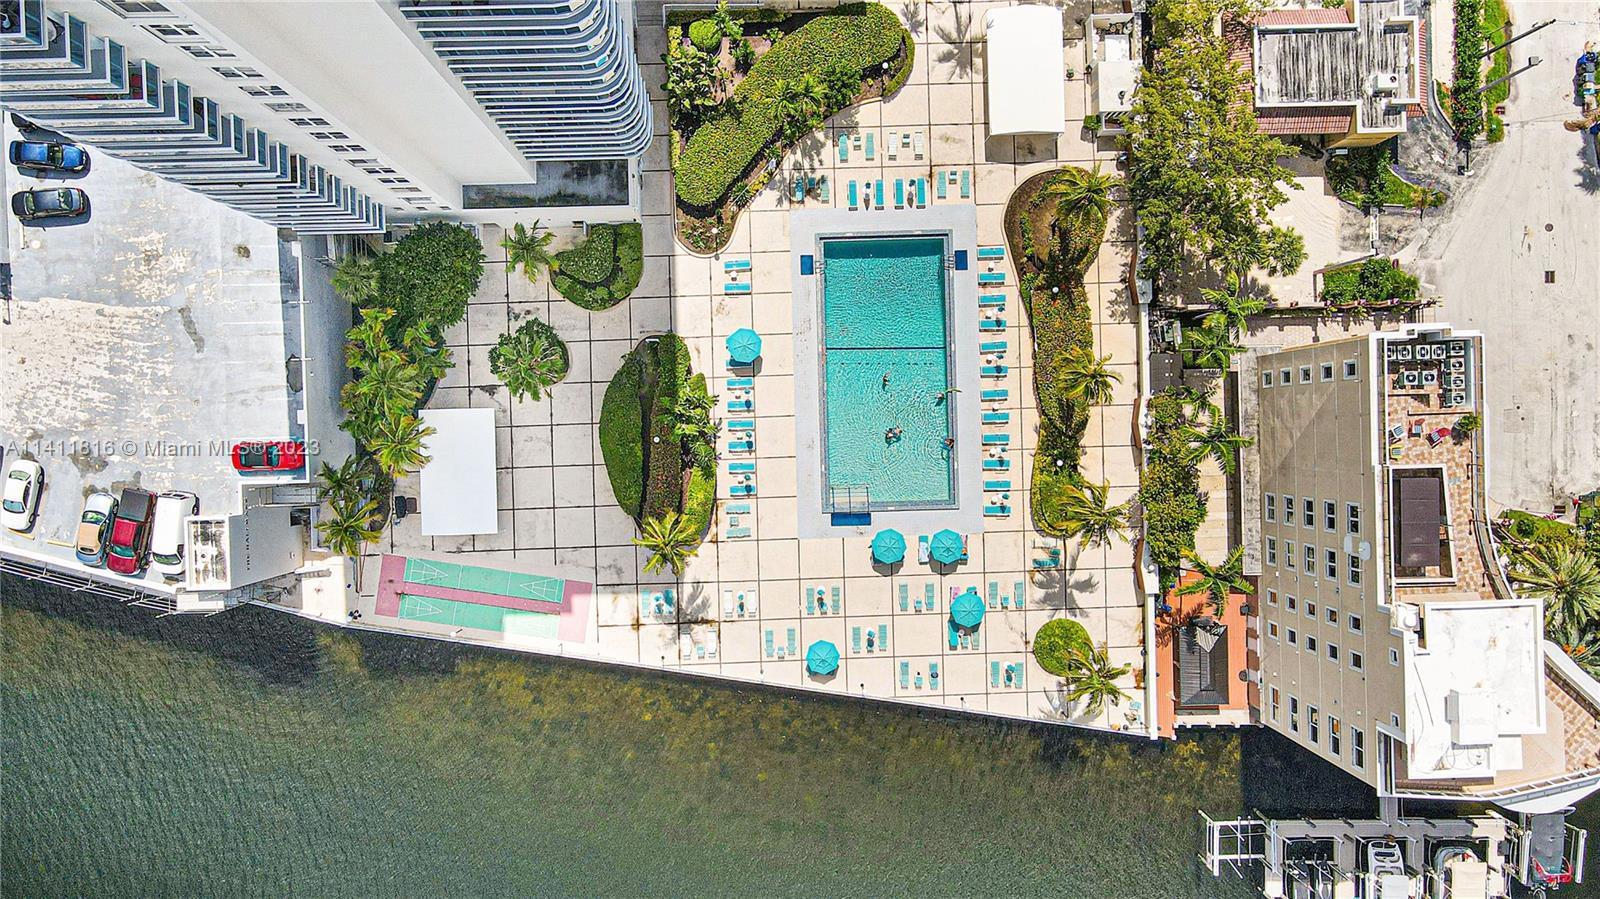 Nestled on the sandy shores of Hollywood, FL this condo is for the beach lovers. The building offers